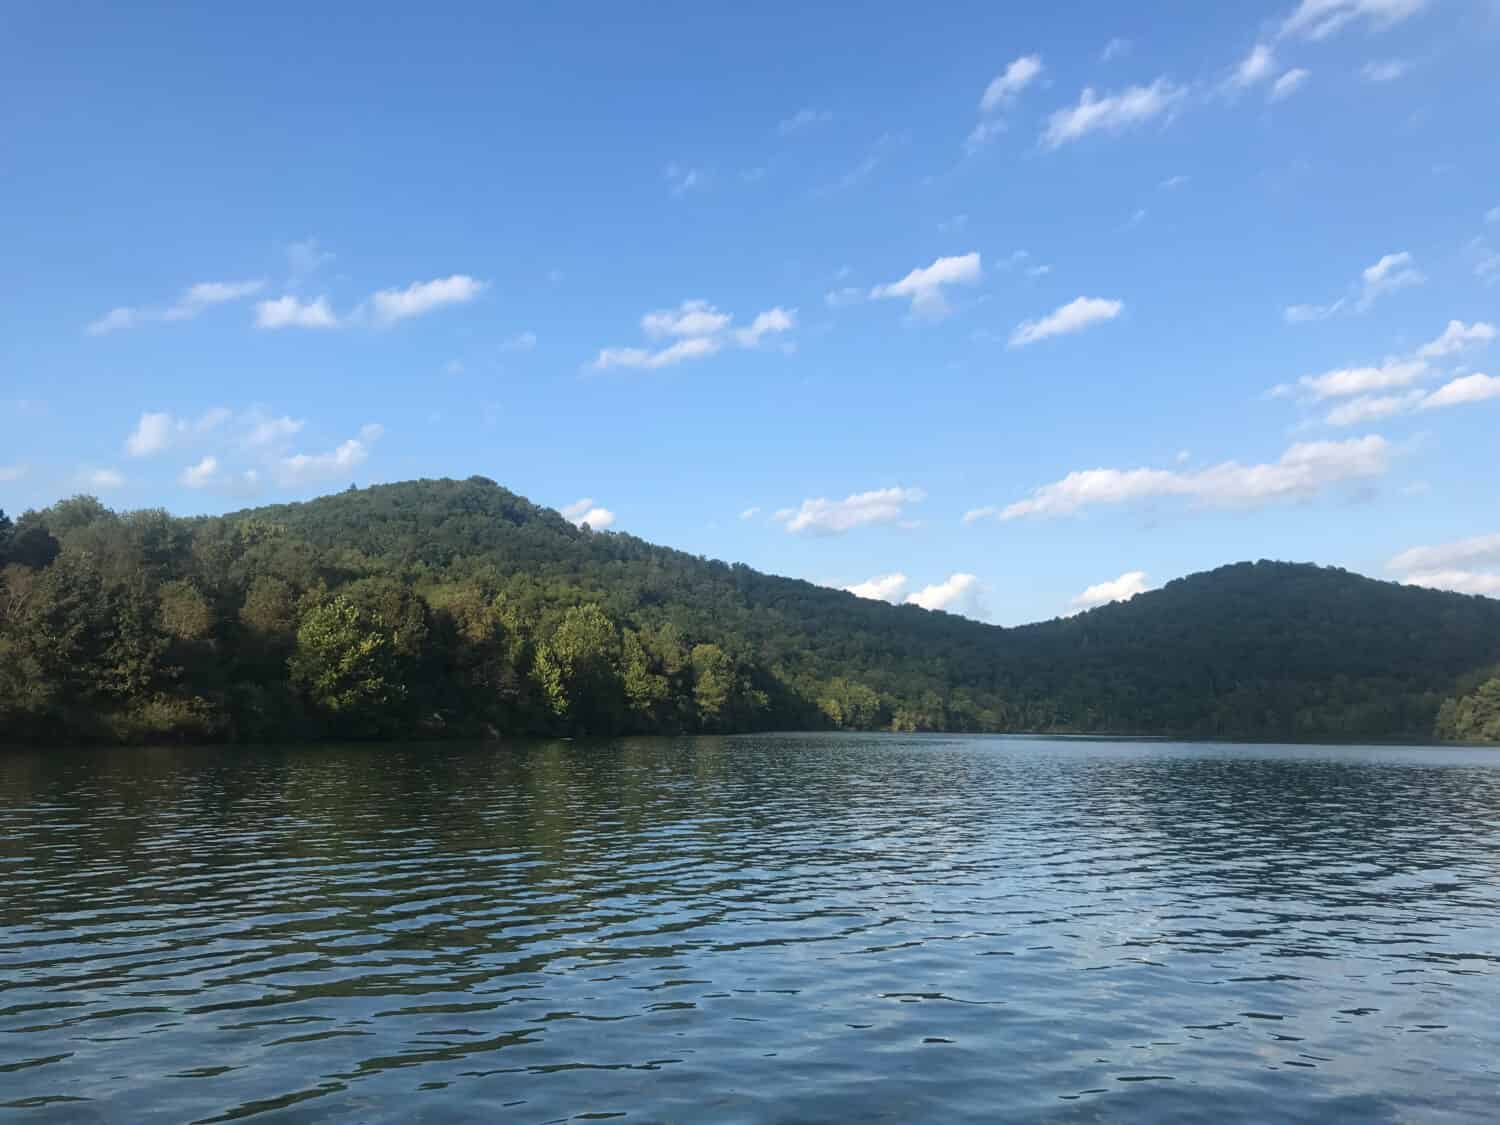 On the water if Burnsville Lake in West Virginia